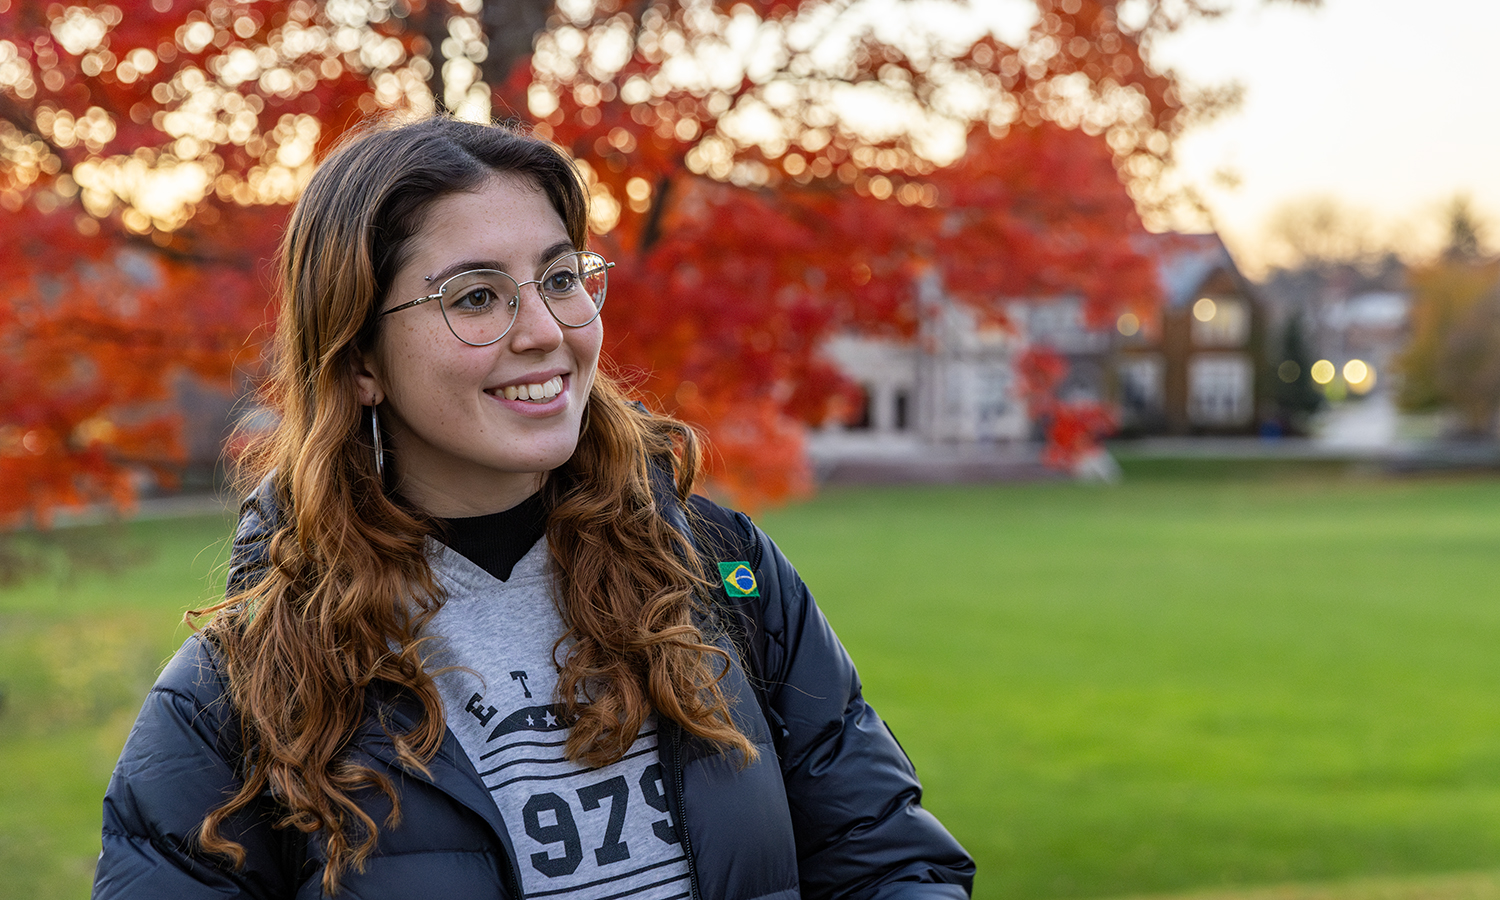  Manuela Taff-Freire ’27 and other students share what makes them grateful in a special edition of TWIP. “I’m thankful for friends, breakfast at Saga, drawing classes, the arts campus and Seneca Lake,” she says.